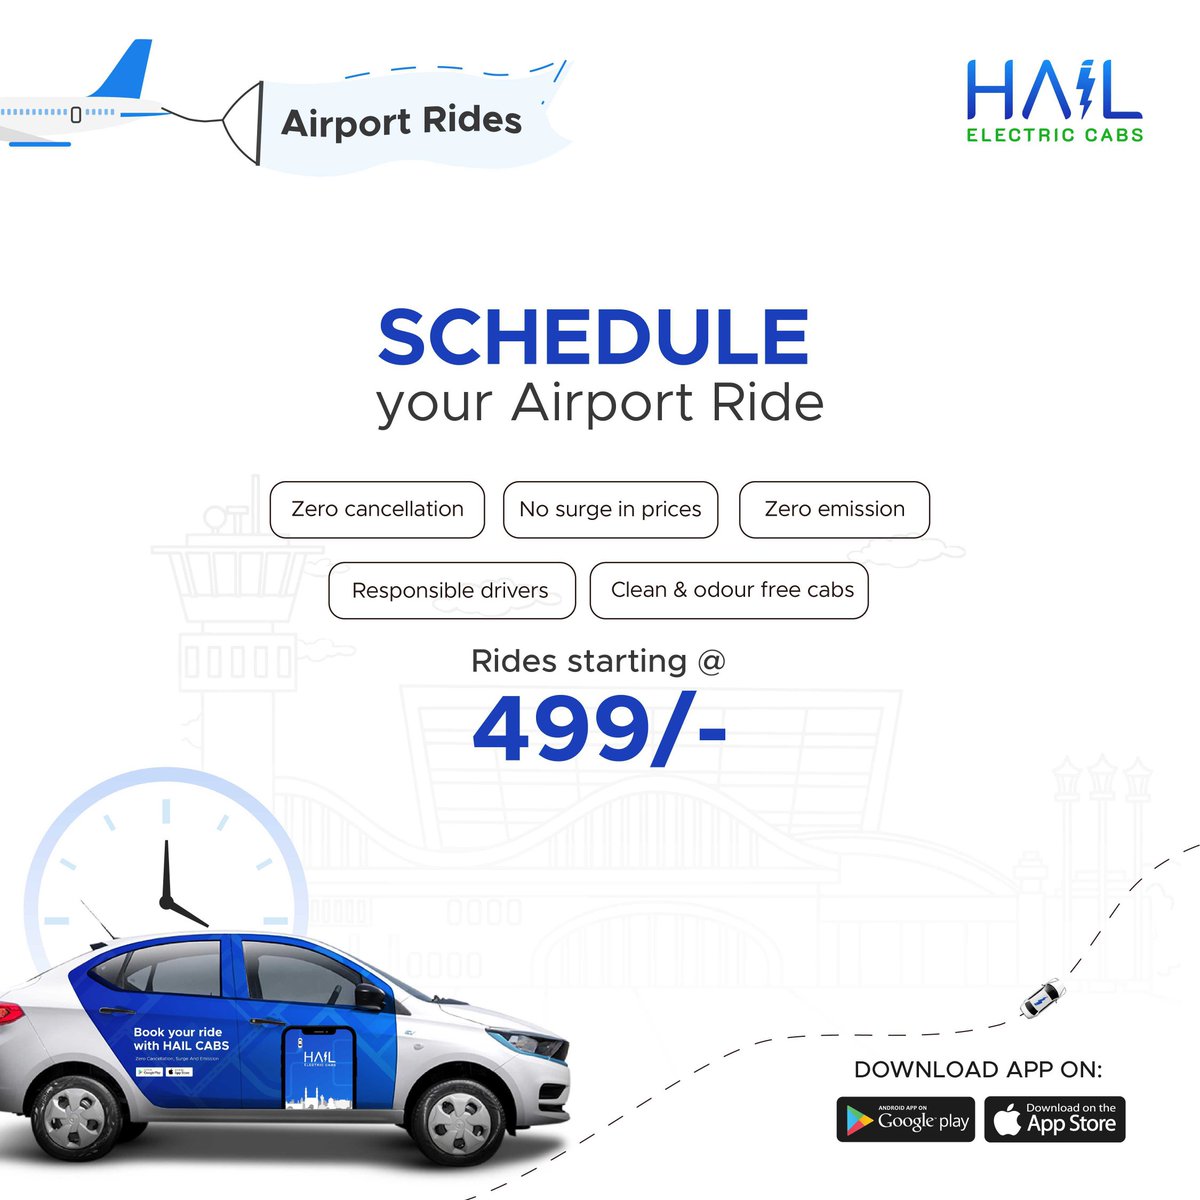 Schedule your ride now for just 
Rs. 499/-
Offer valid till 31st March. 

#HailCabs #ElectricVehicles #AirportRides #Airport #Hyderabad